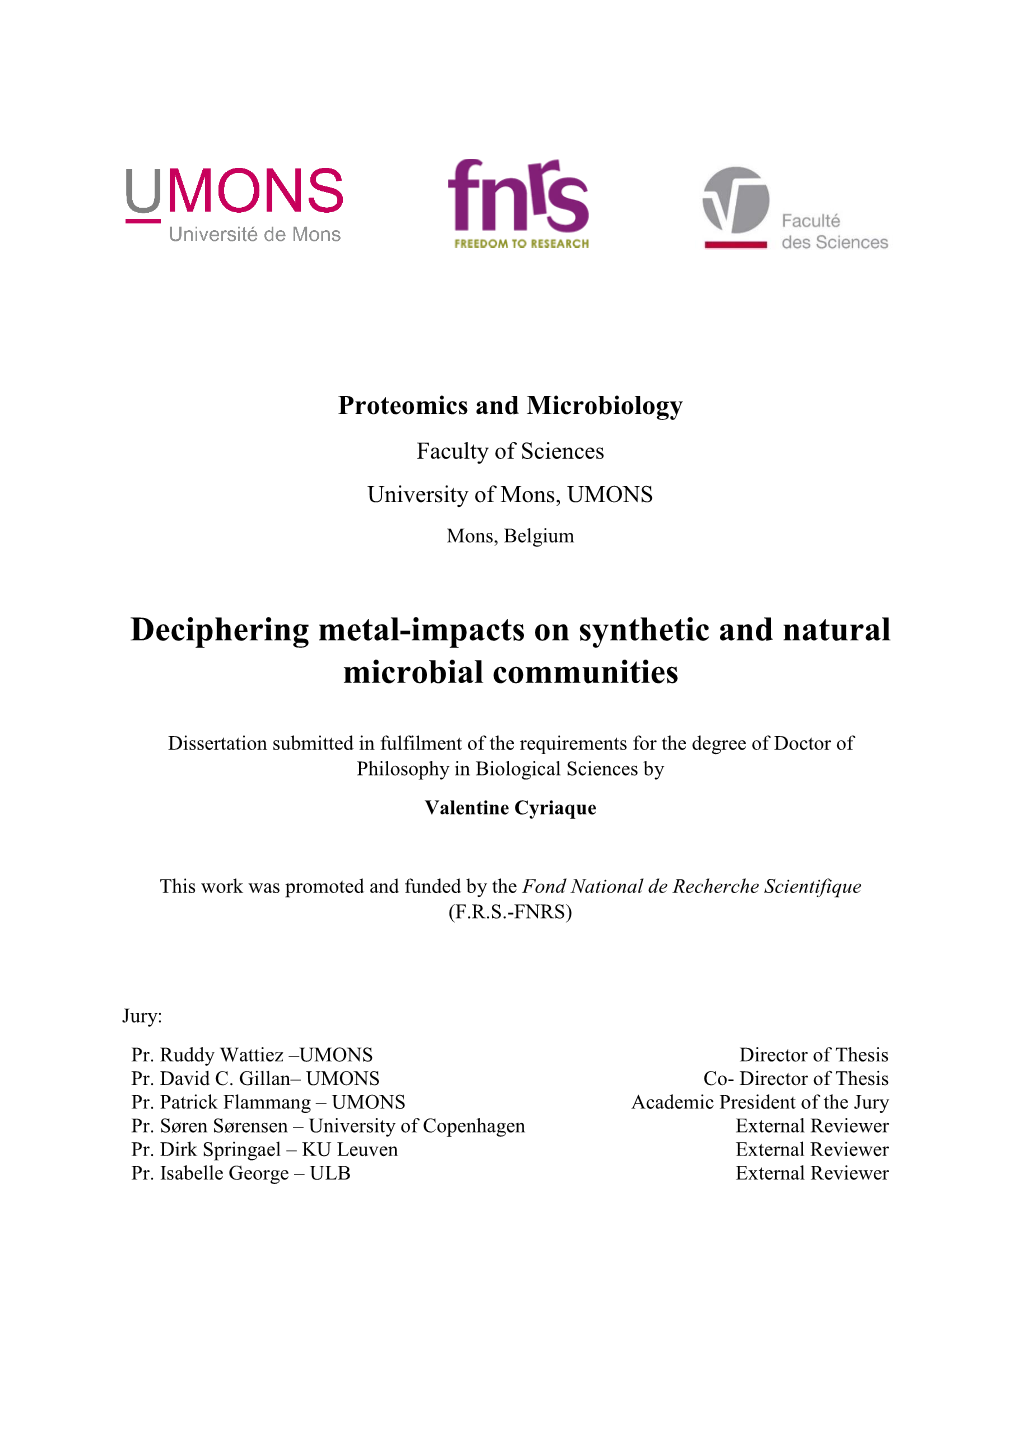 Deciphering Metal-Impacts on Synthetic and Natural Microbial Communities